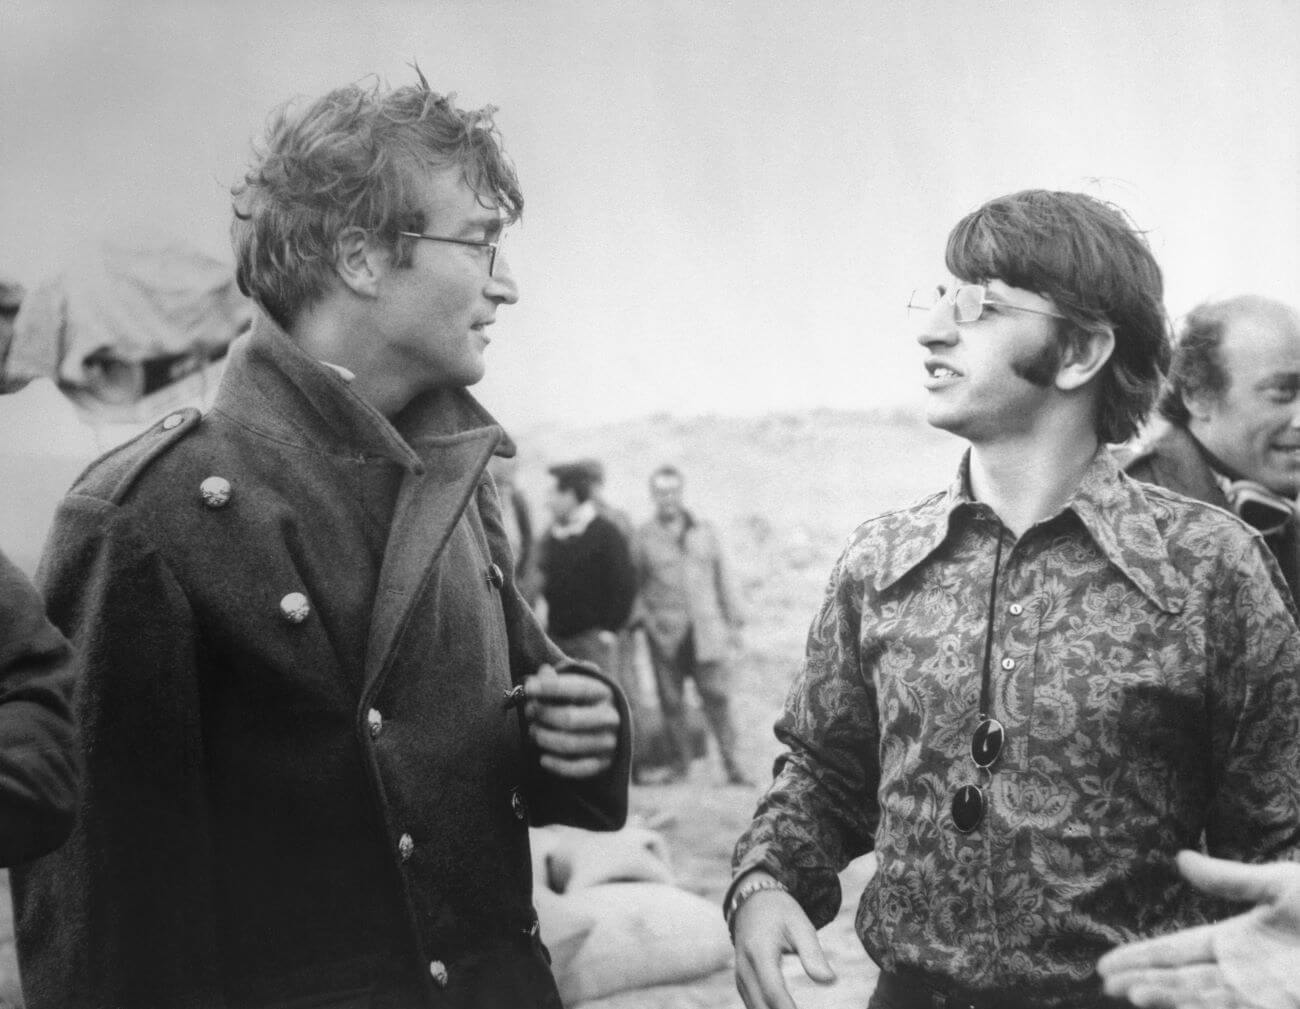 A black and white picture of John Lennon and Ringo Starr in conversation on a film set.